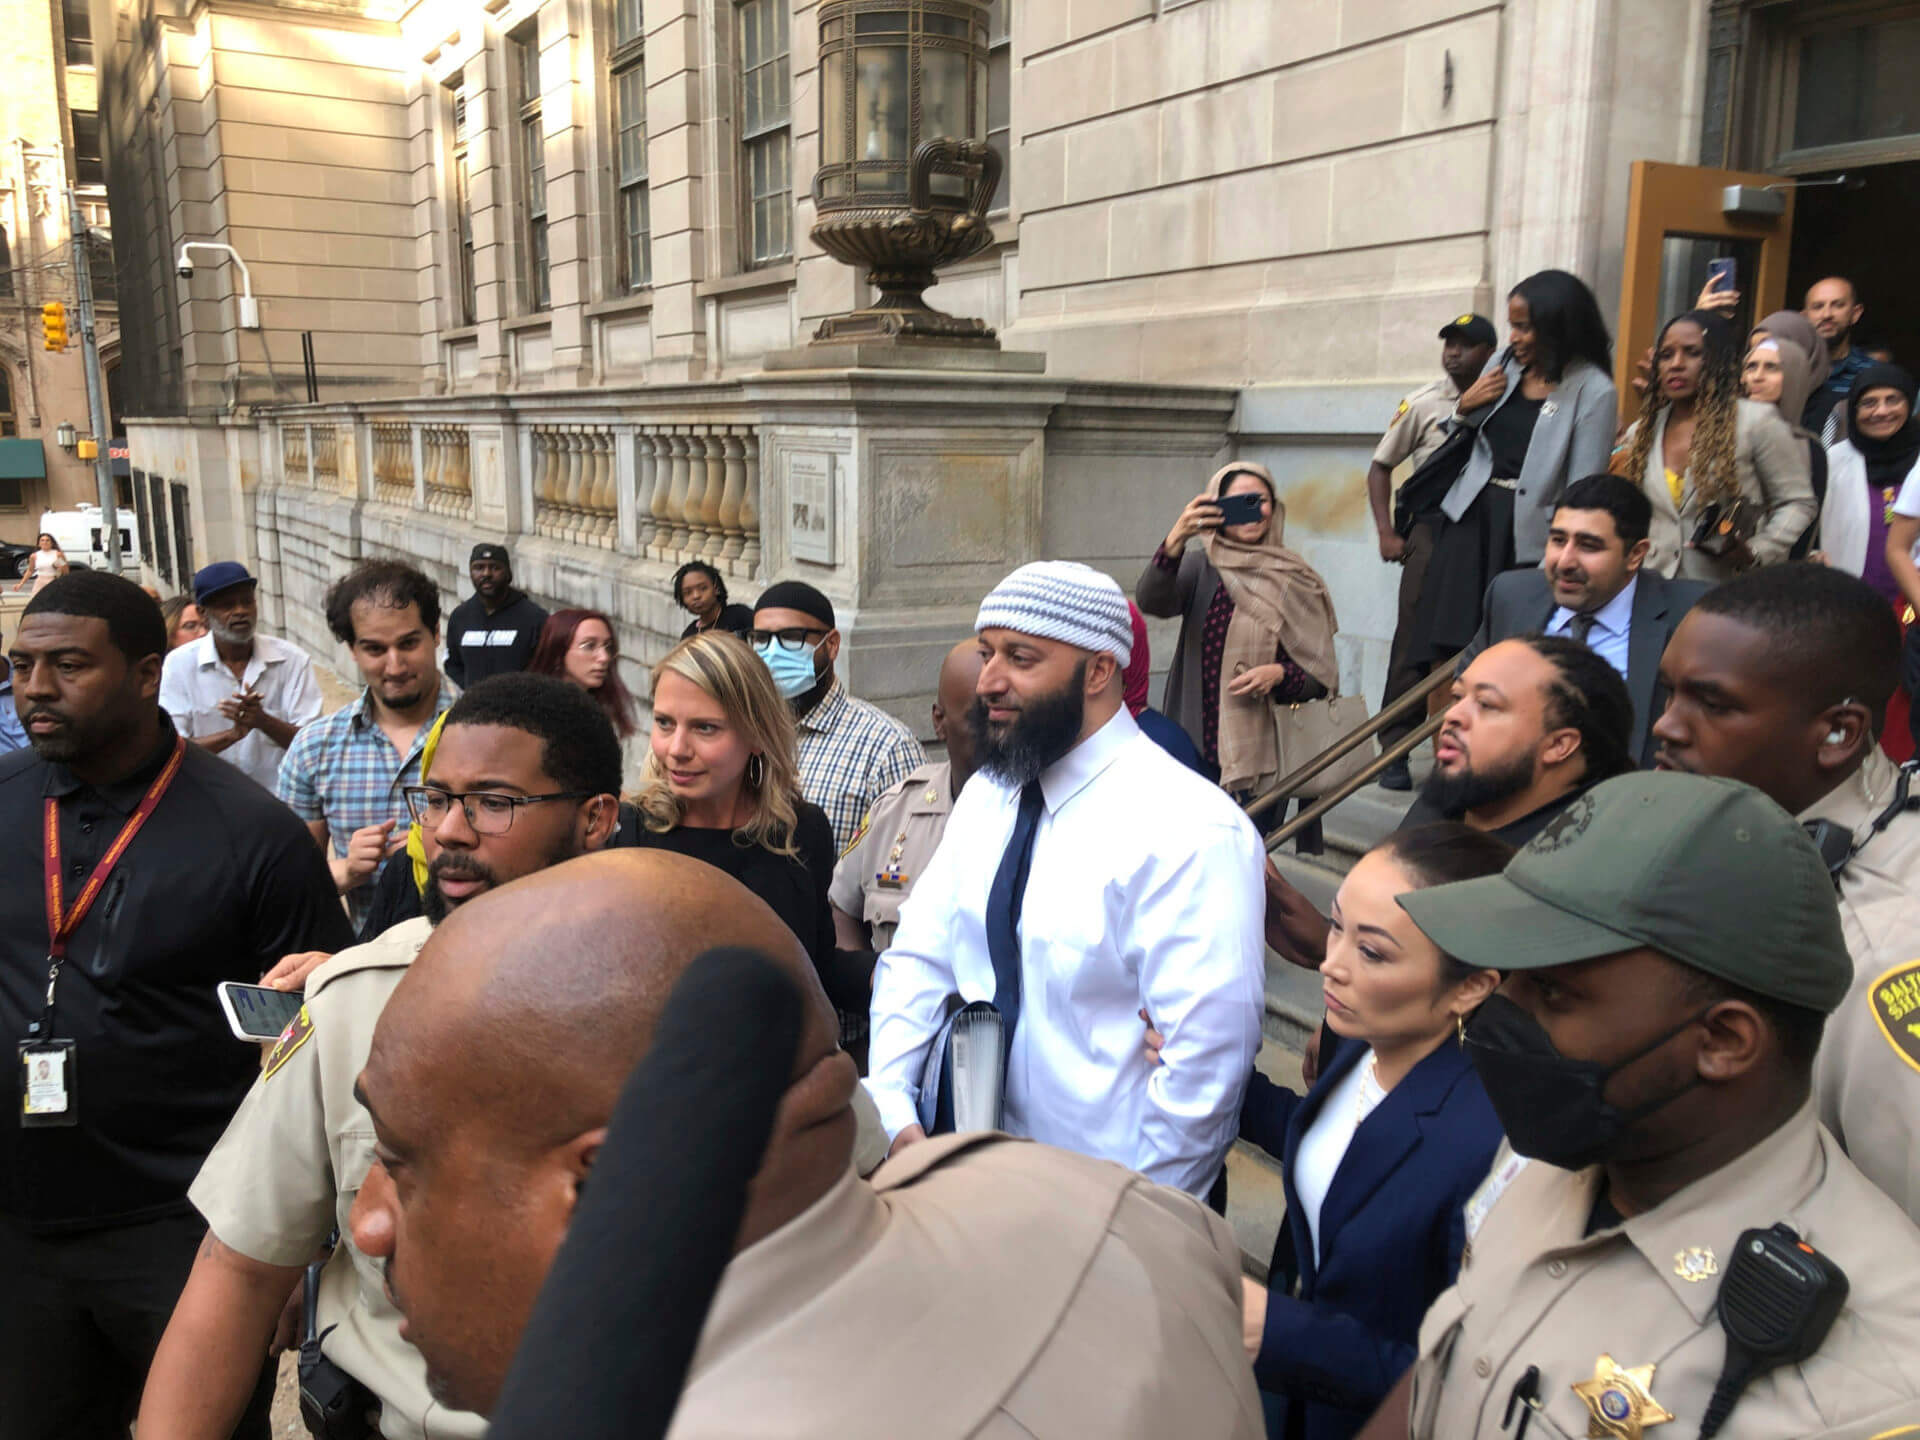 Adnan Syed, center, leaves the Elijah E. Cummings Courthouse